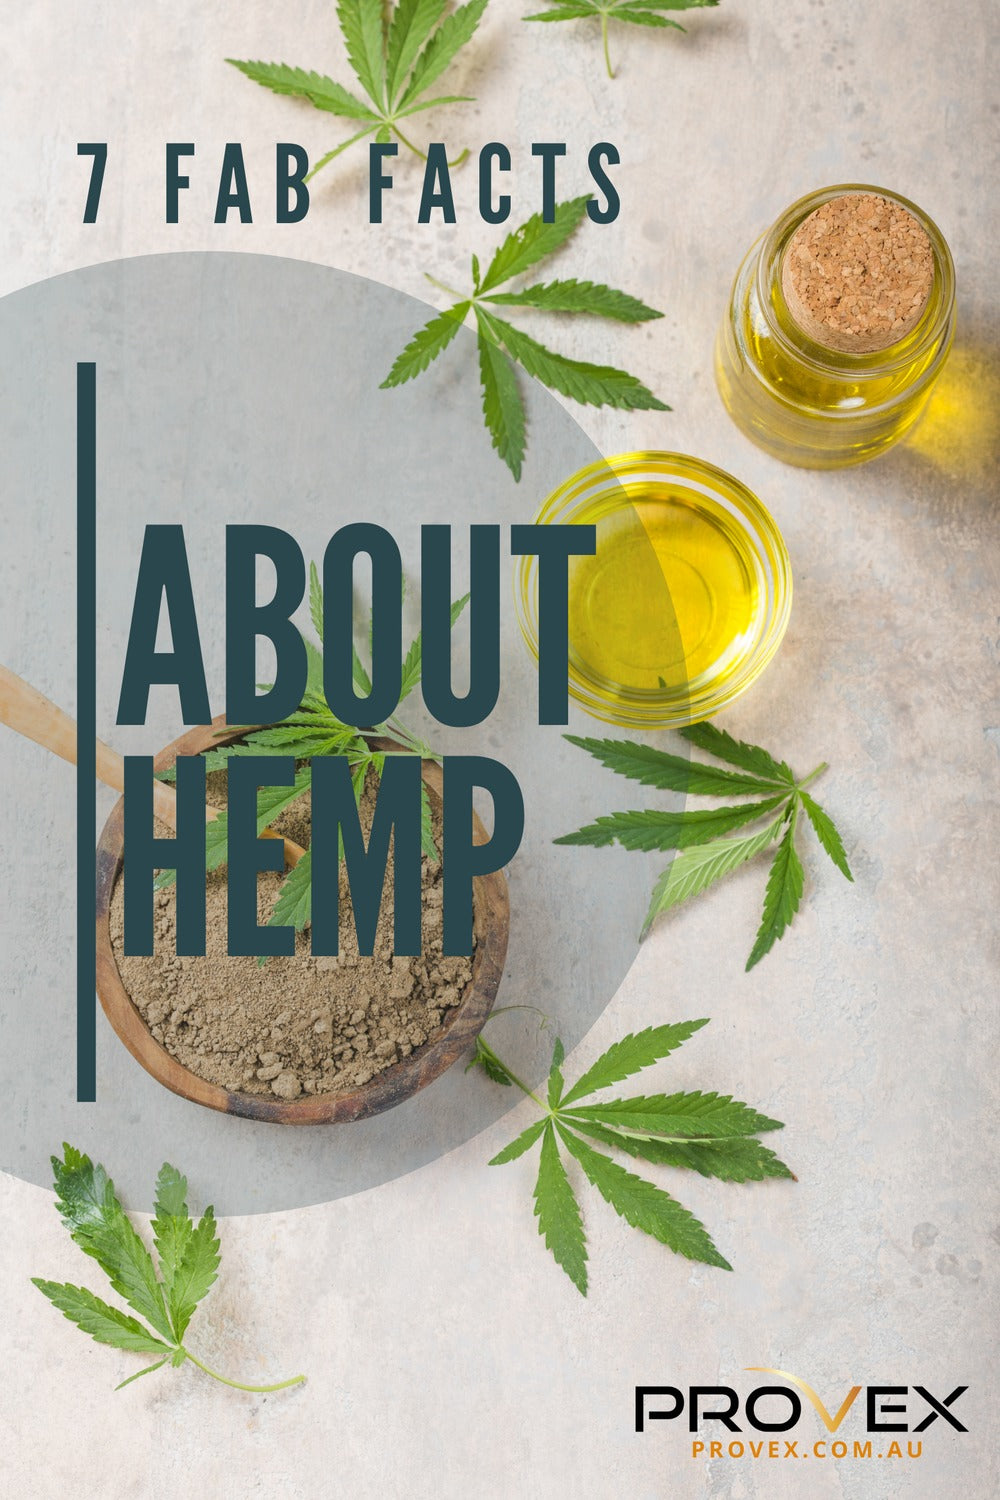 Fabulous facts all about hemp and why you need it in your life!